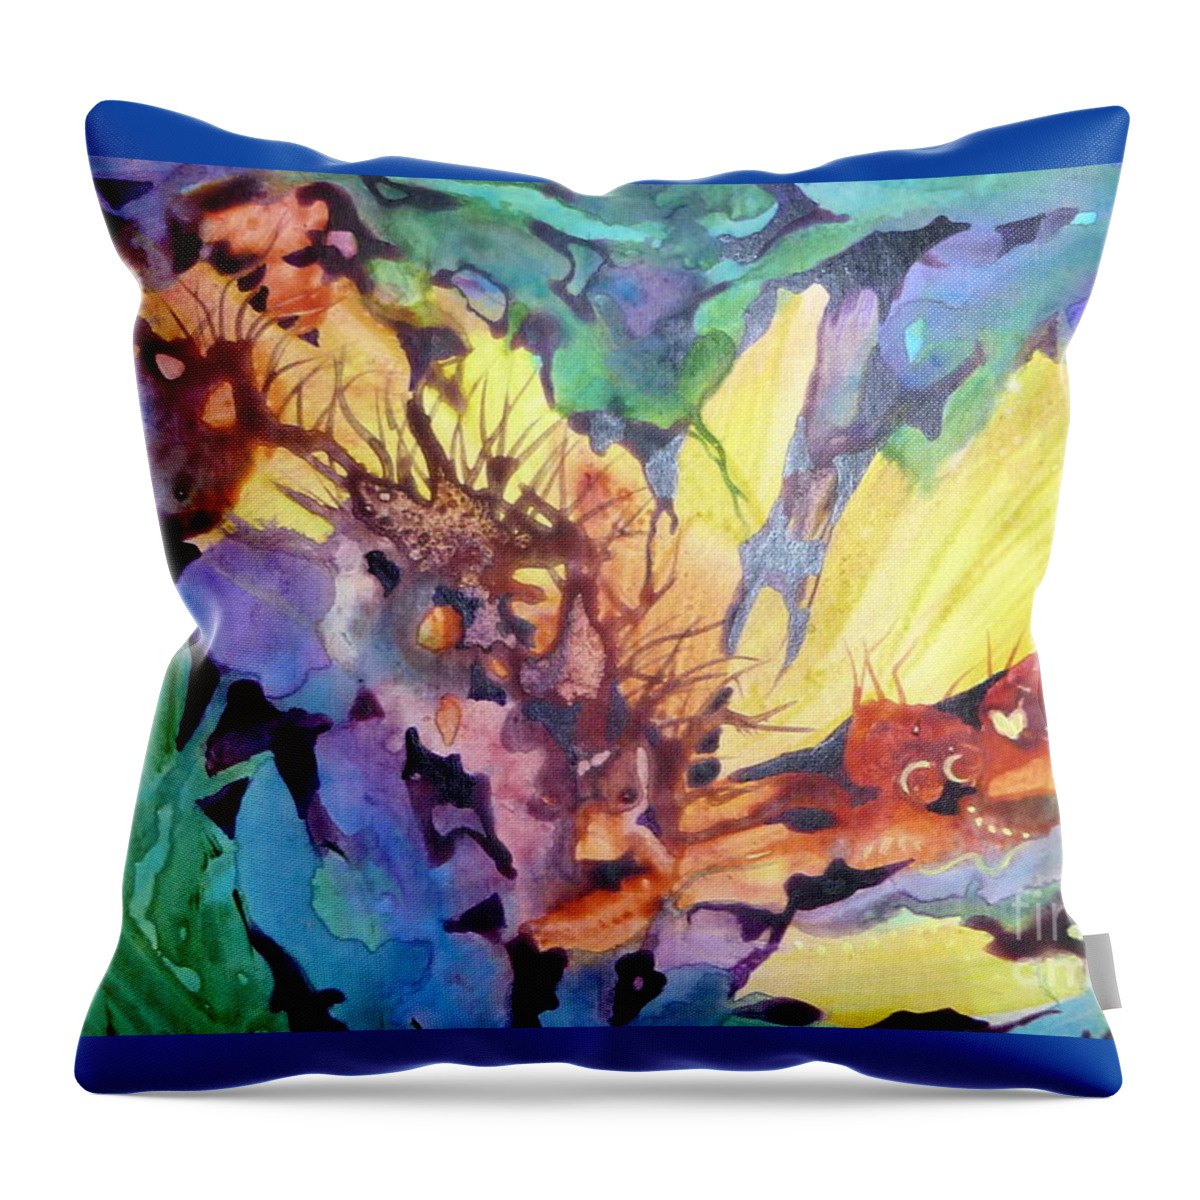 Rainbow Colors Throw Pillow featuring the painting Heat Wave by Joan Clear